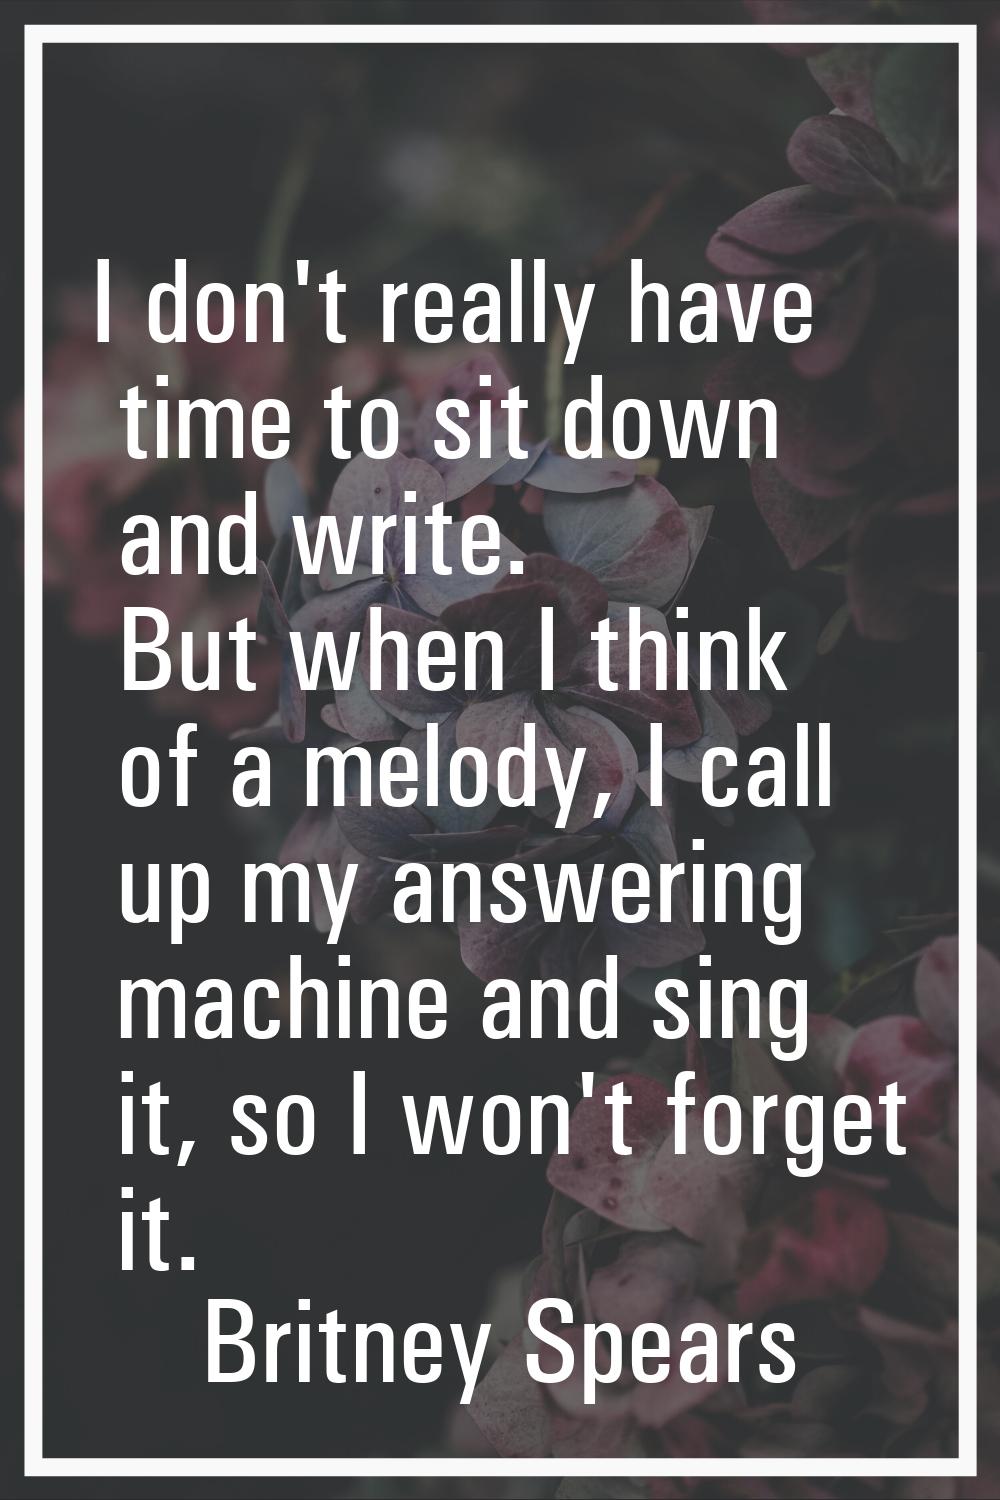 I don't really have time to sit down and write. But when I think of a melody, I call up my answerin